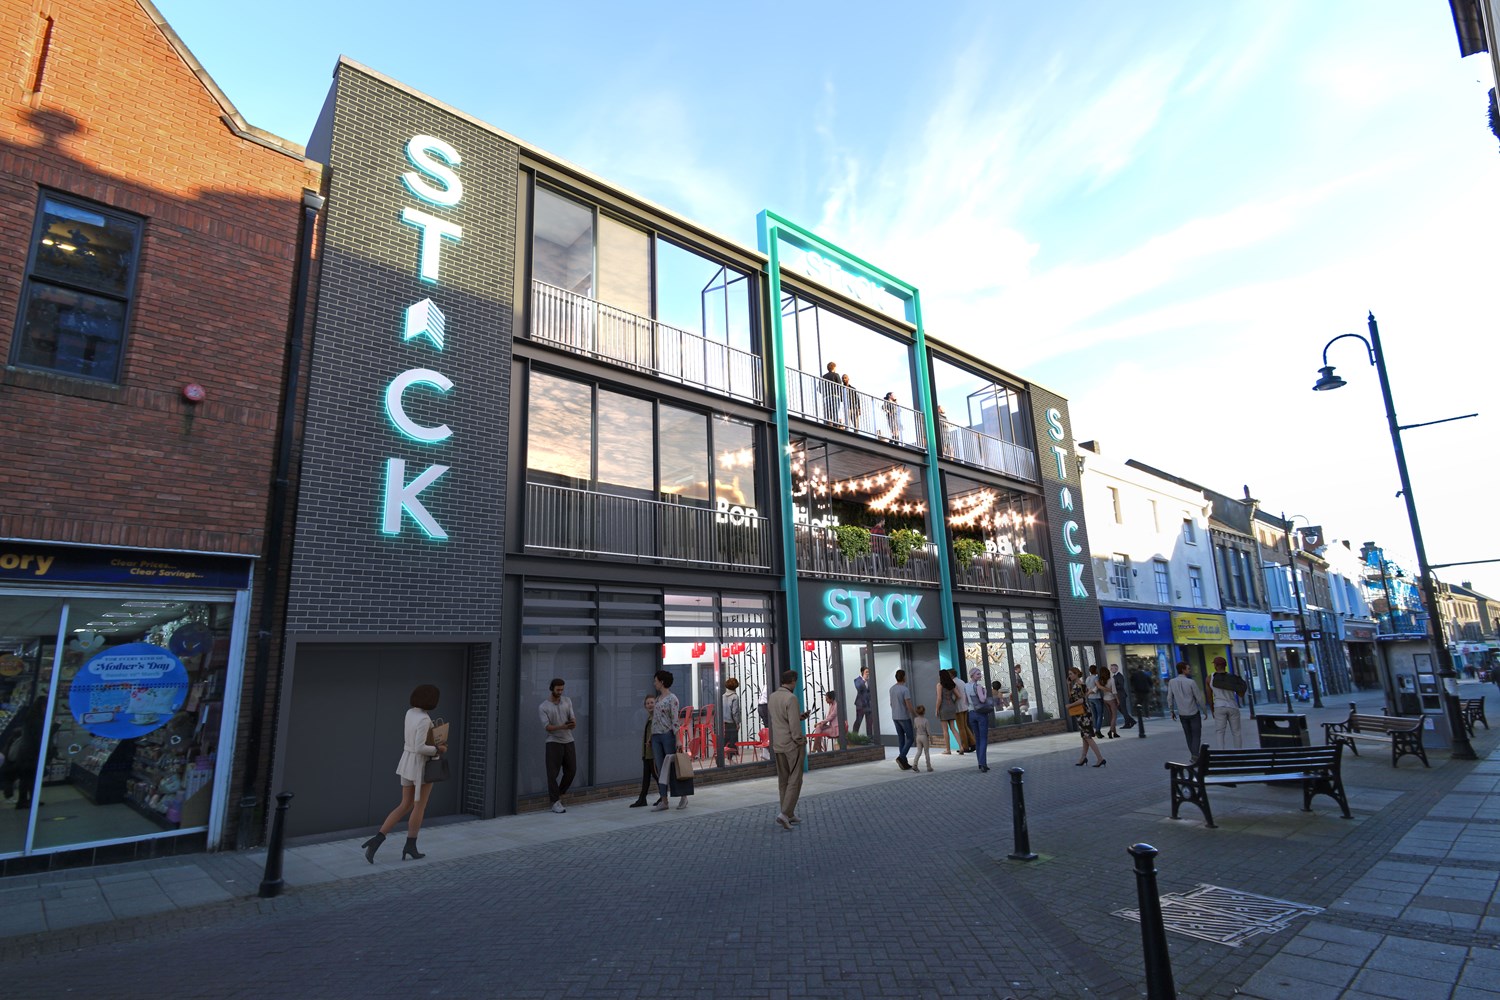 Plans for a STACK street food village elsewhere in the UK. Credit: STACK